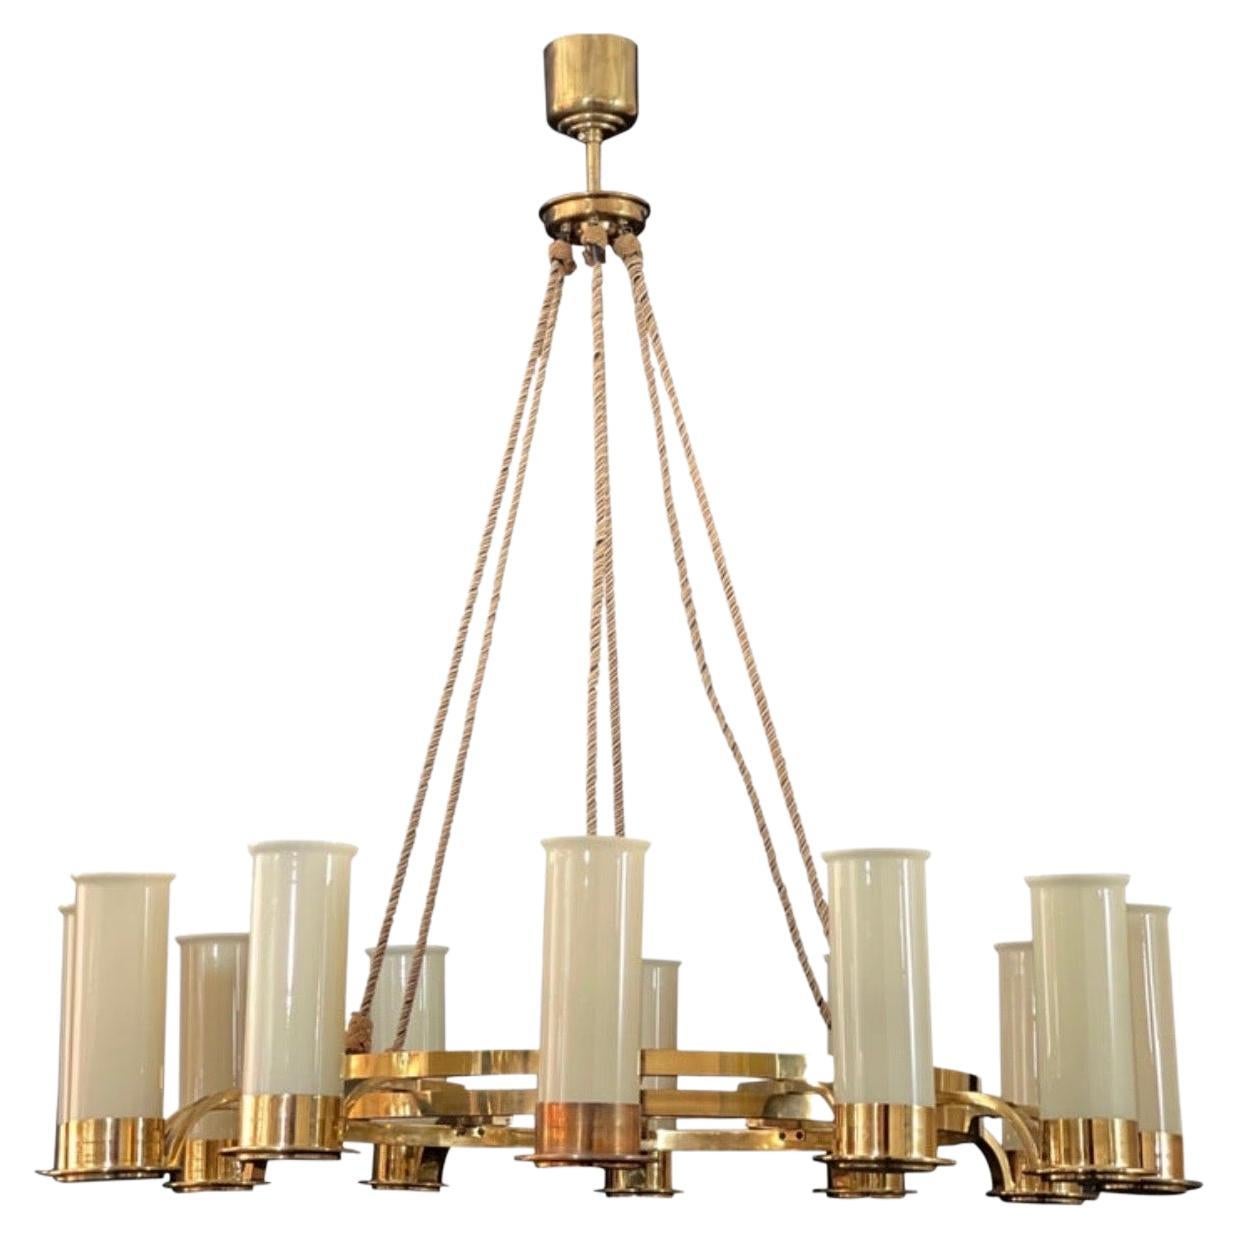 Pair of Customized Art Deco Style Brass and Glass Chandeliers.
Socket: each 12 x E26 for US standards.